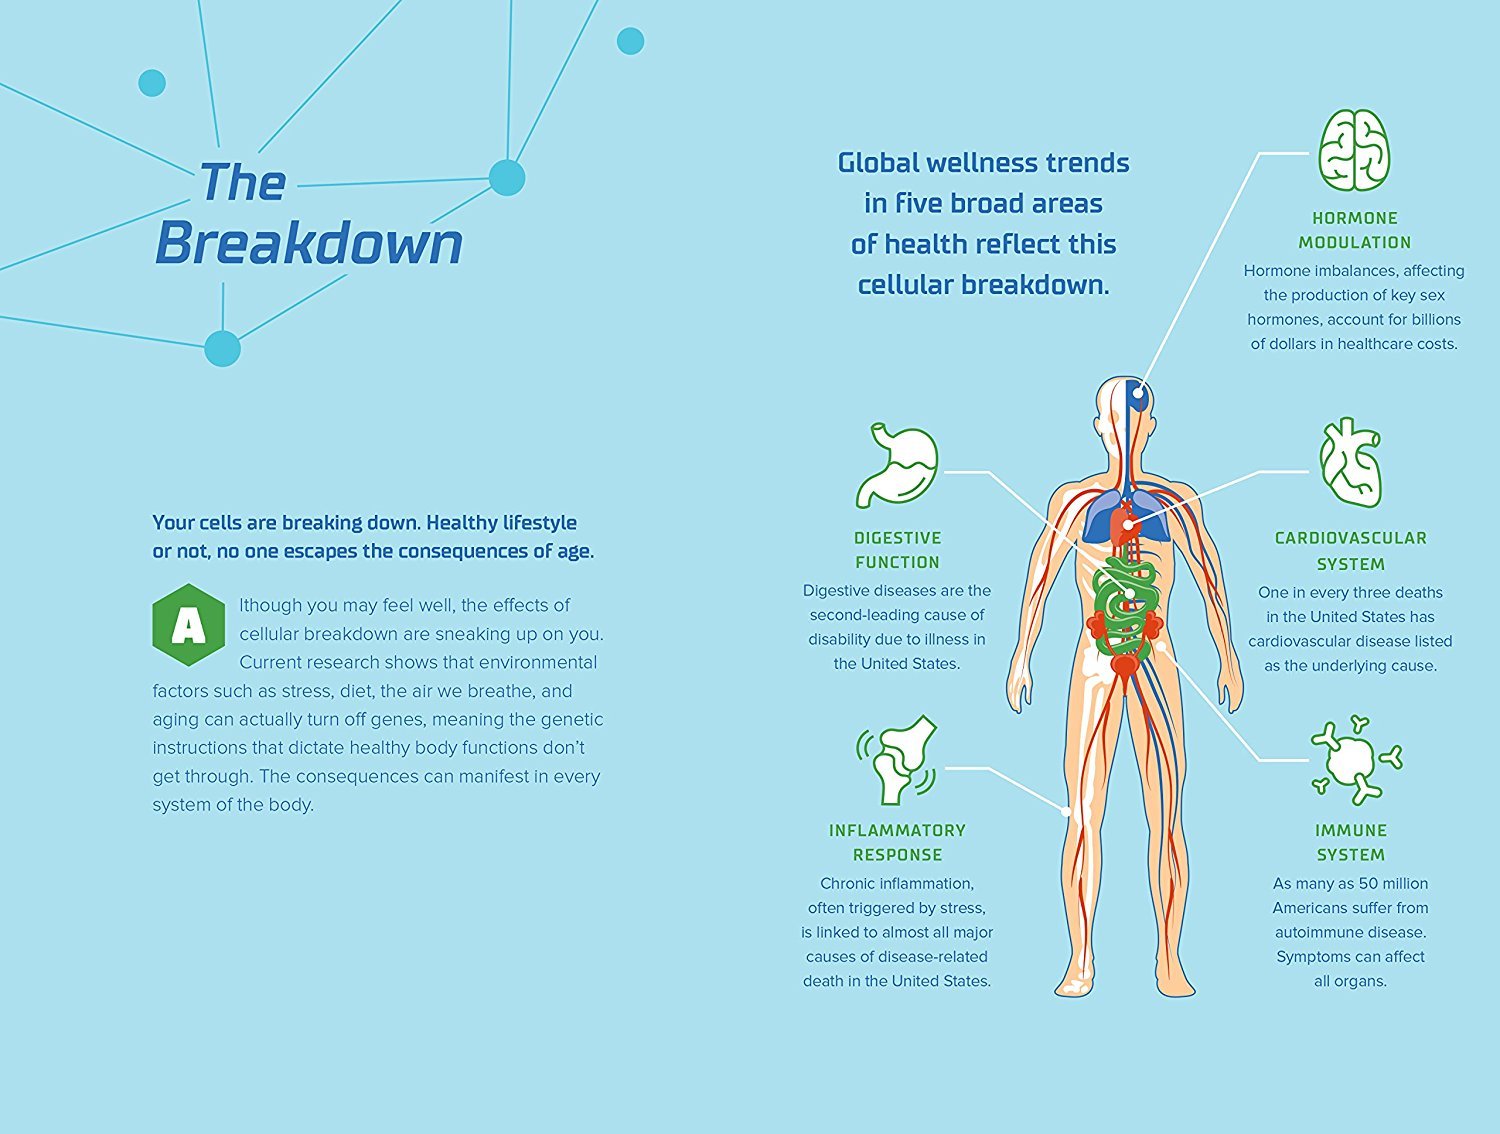 Global wellness trends in five broad areas of health reflect the process of cellular breakdown.